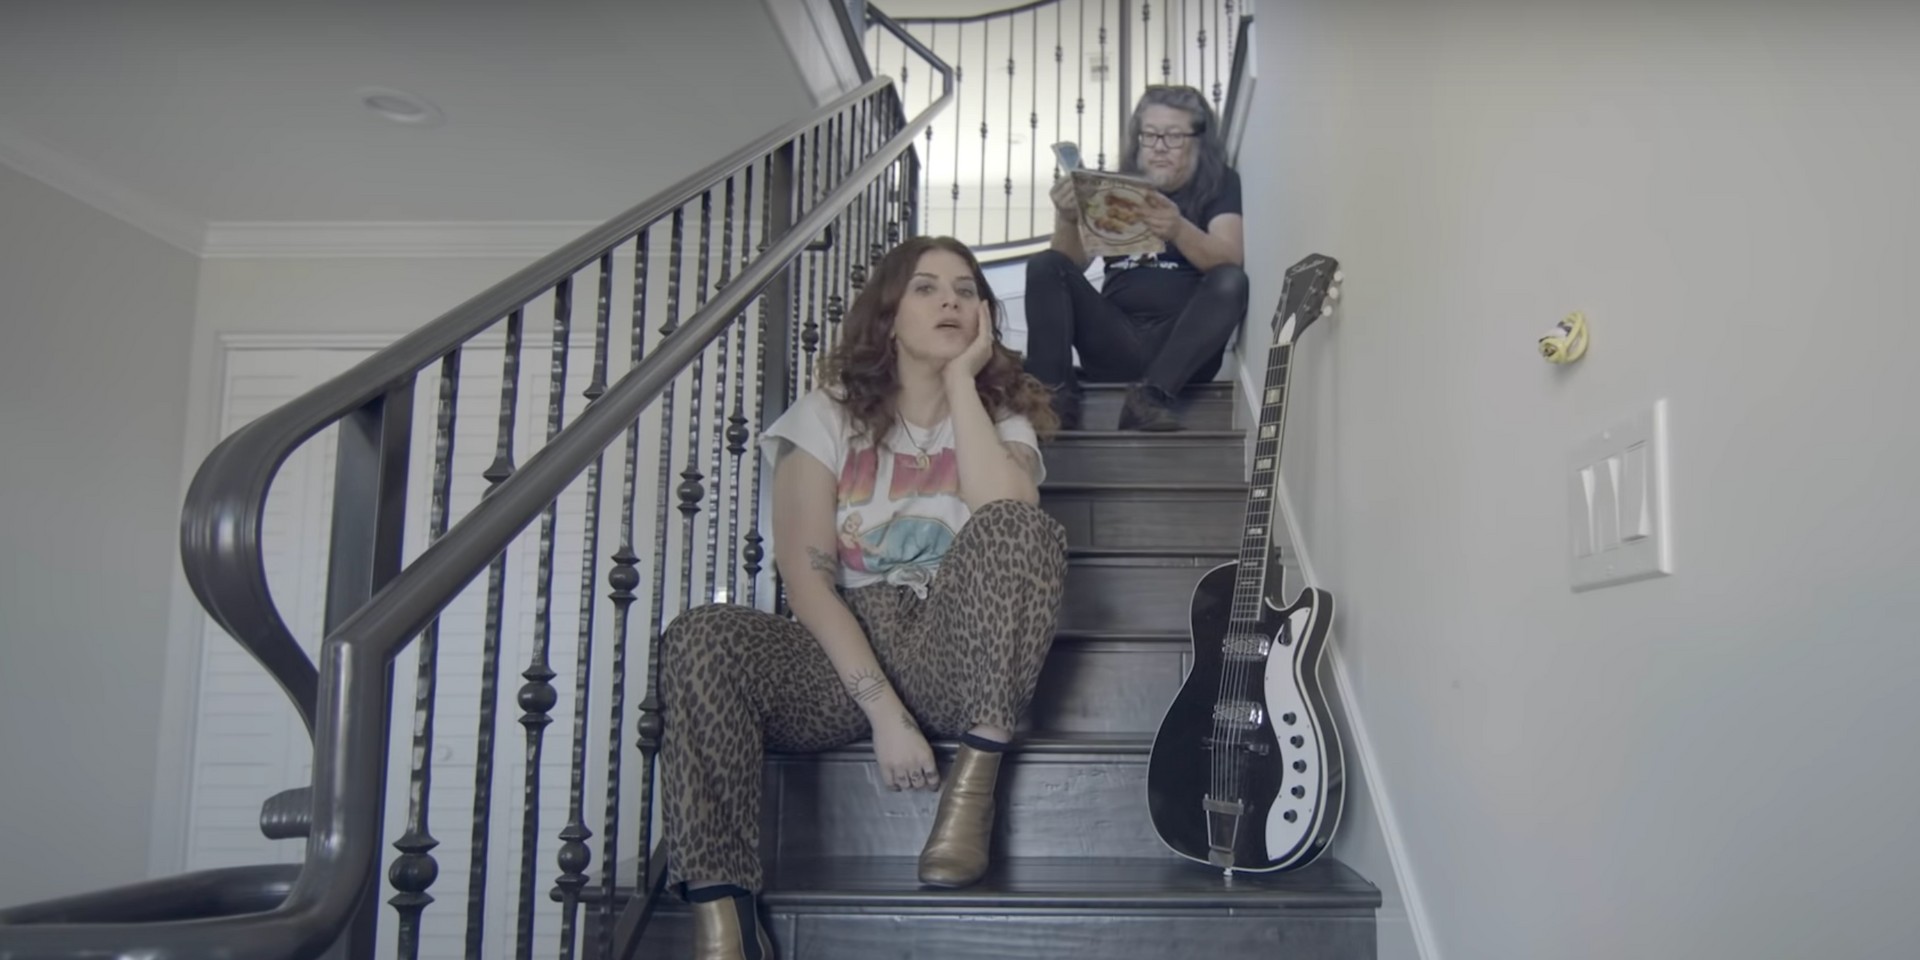 Best Coast share new song and music video, 'For the First Time', announce new album